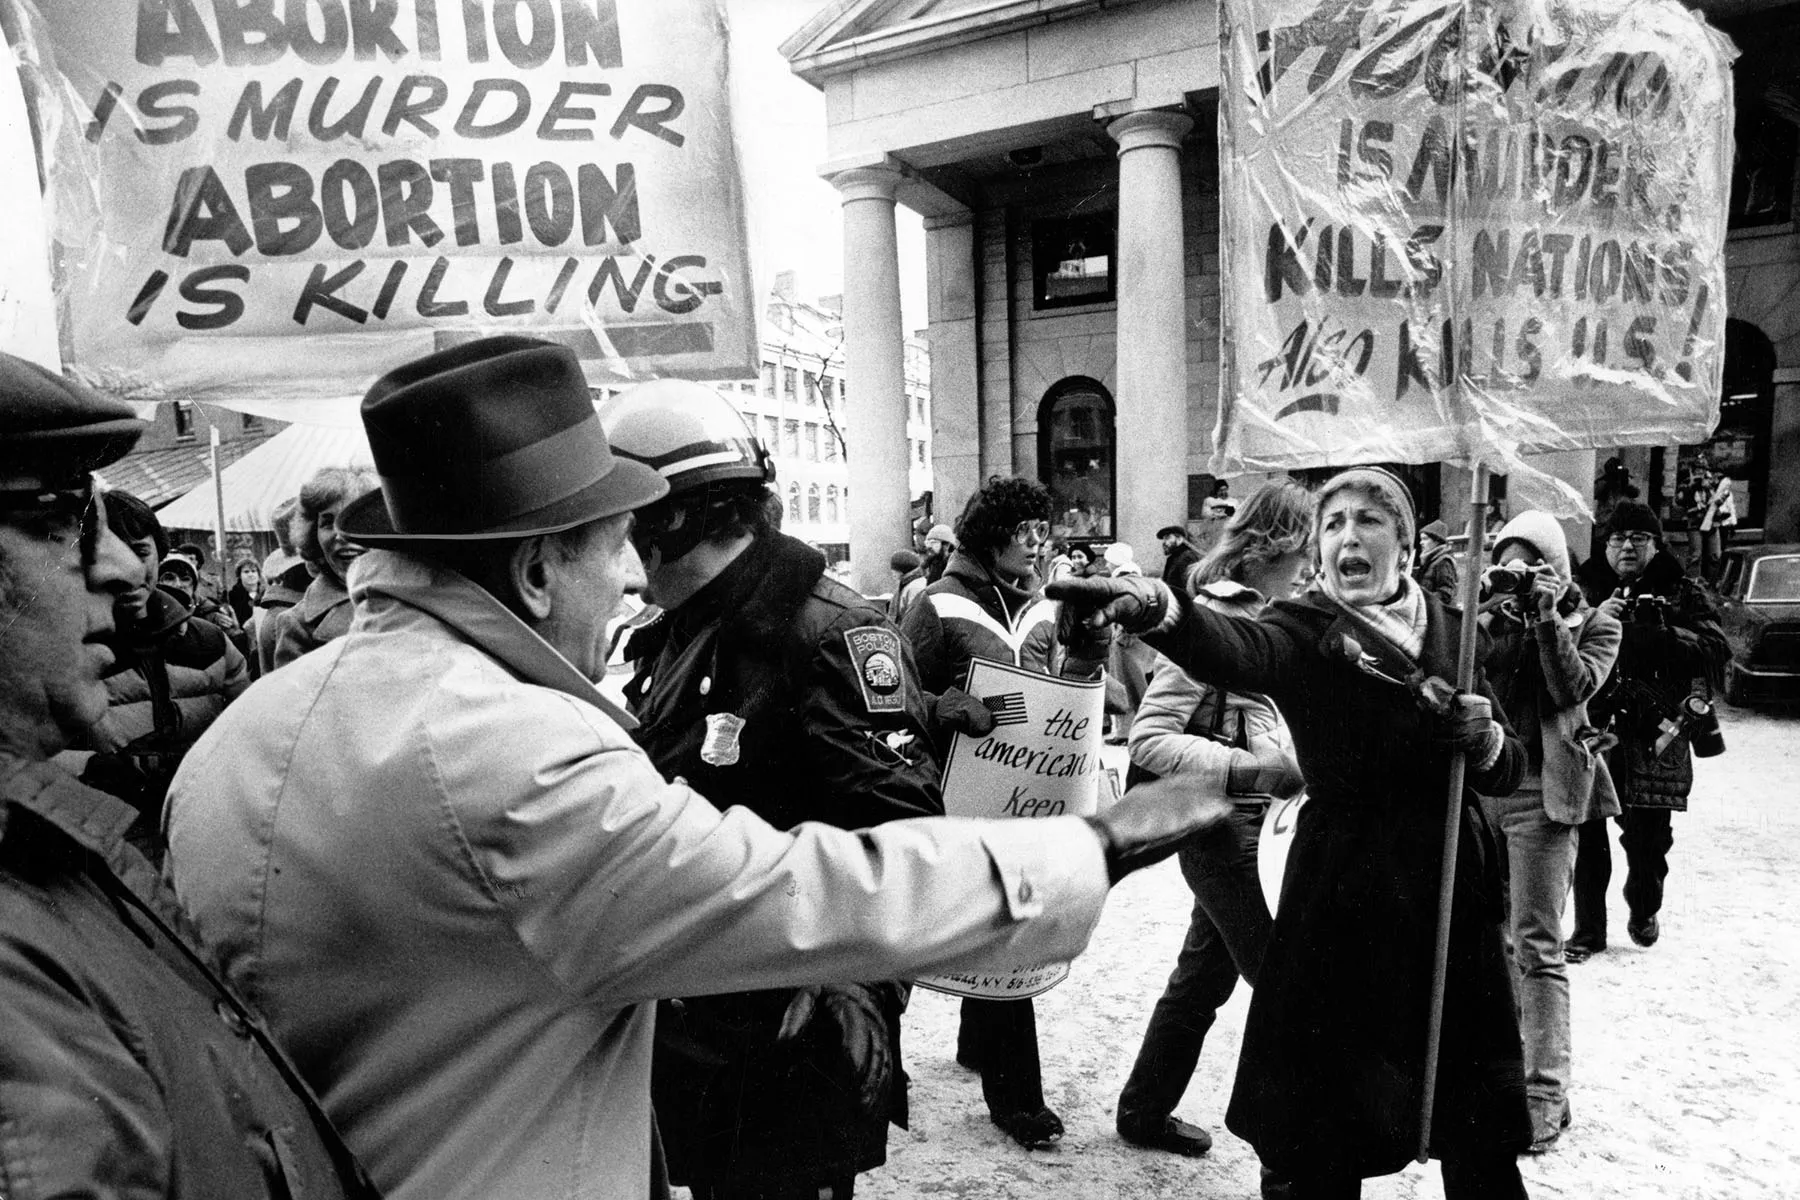 Anti-abortion and pro-abortion activists clash during a demonstration.